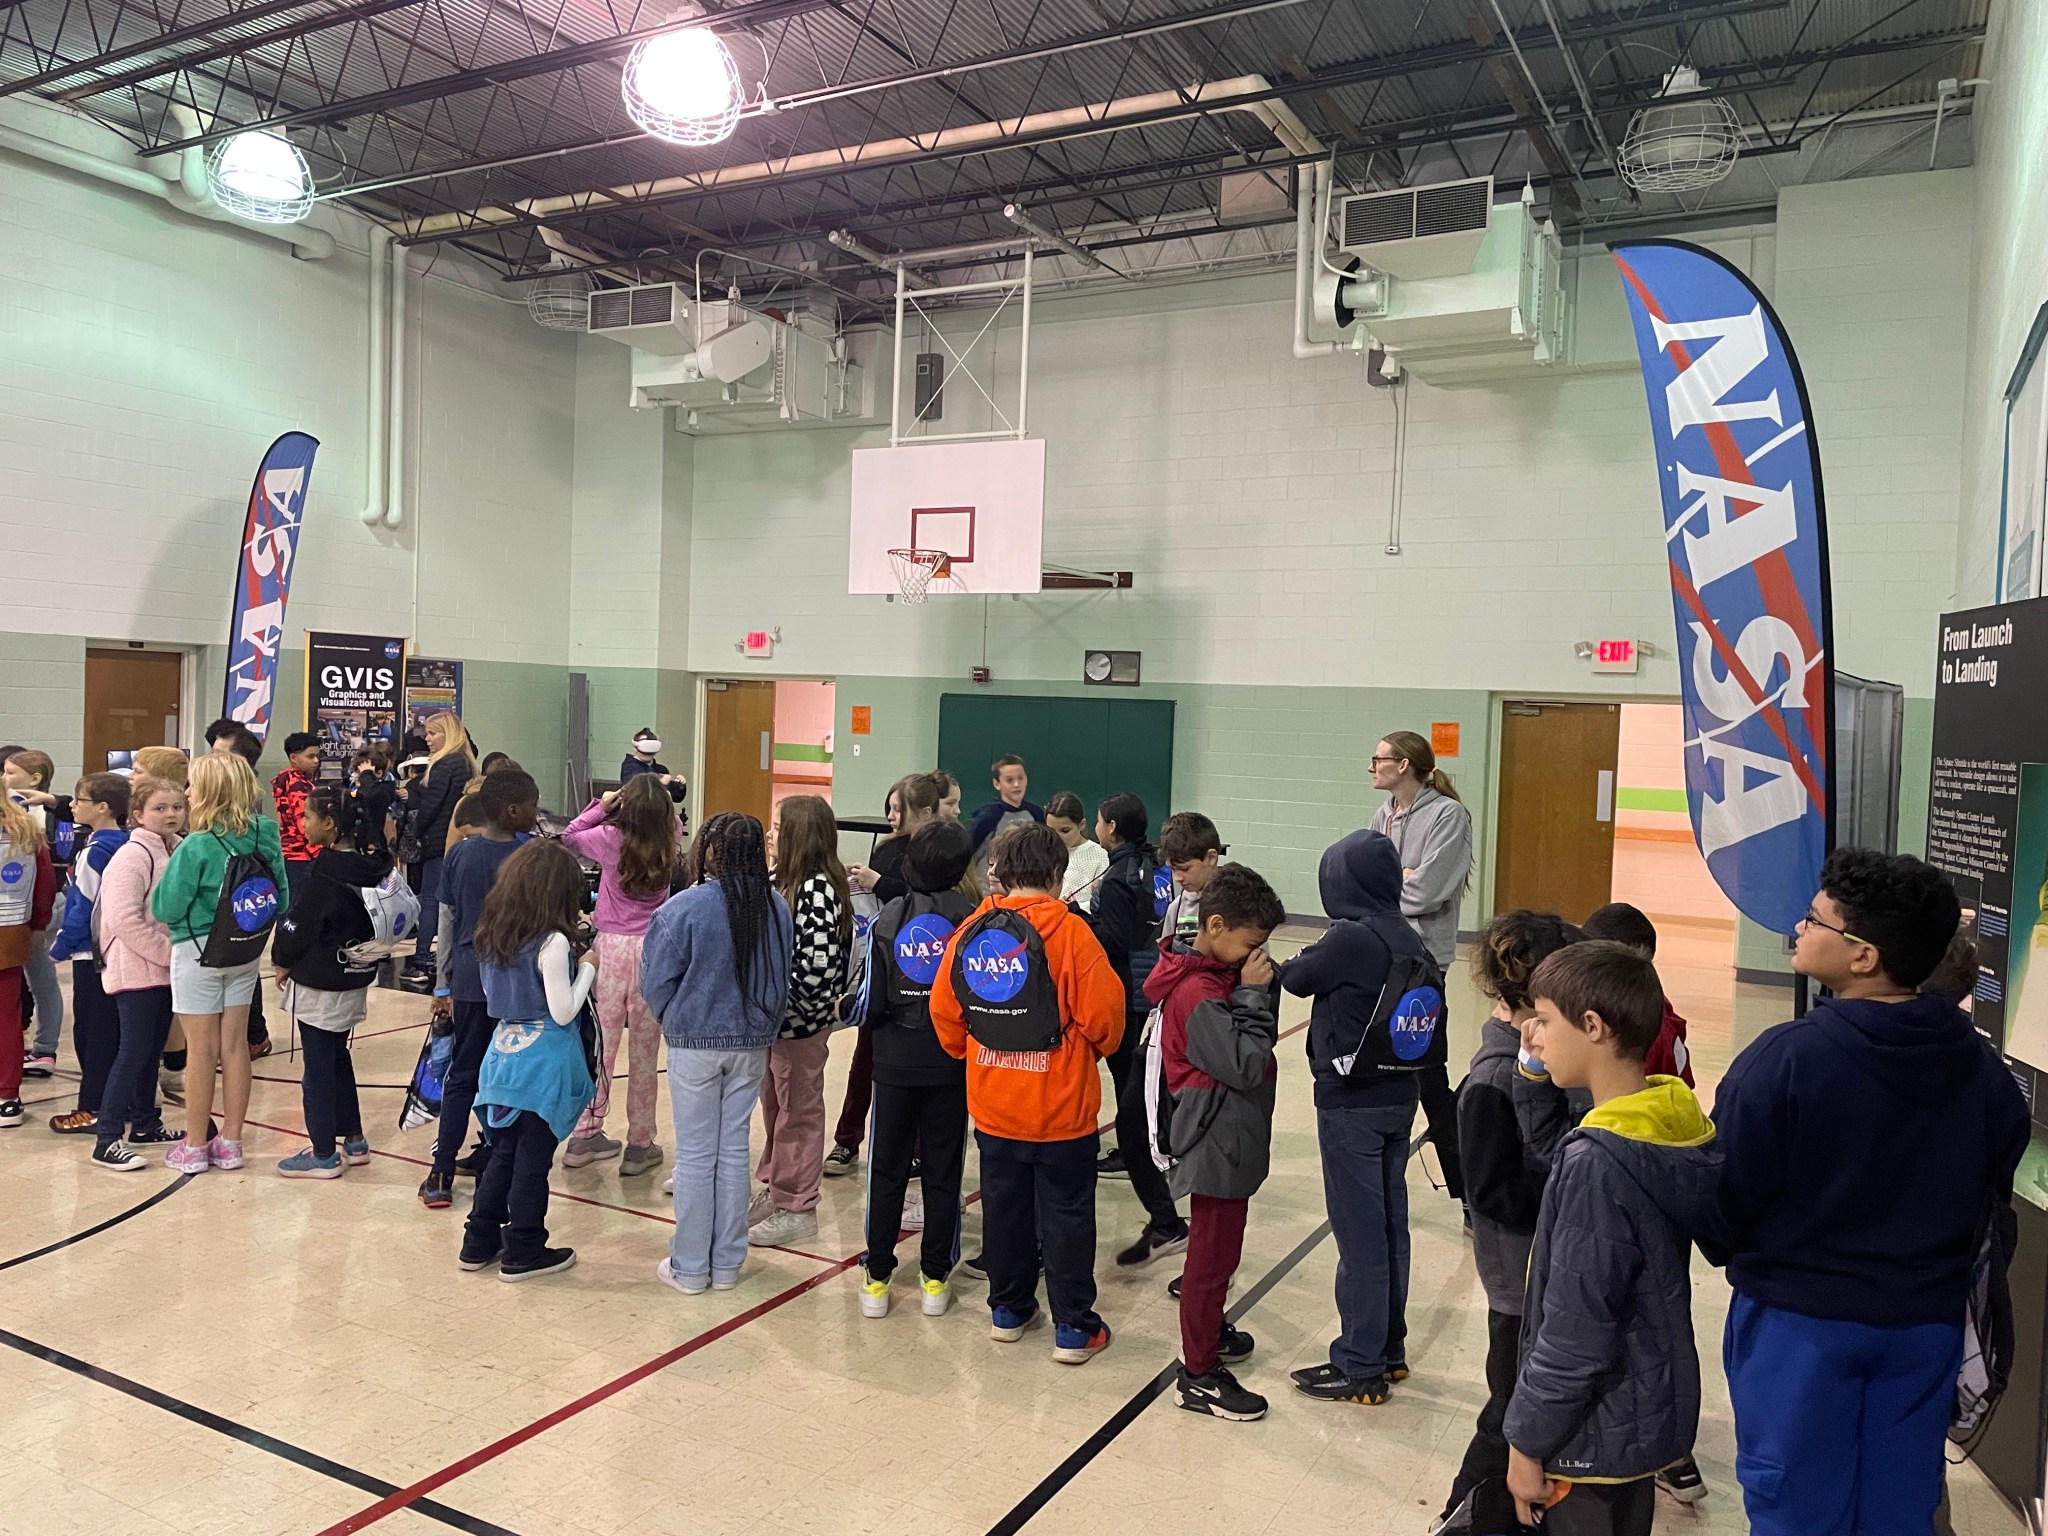 Young students stand in a line to participate in interactive exhibits.